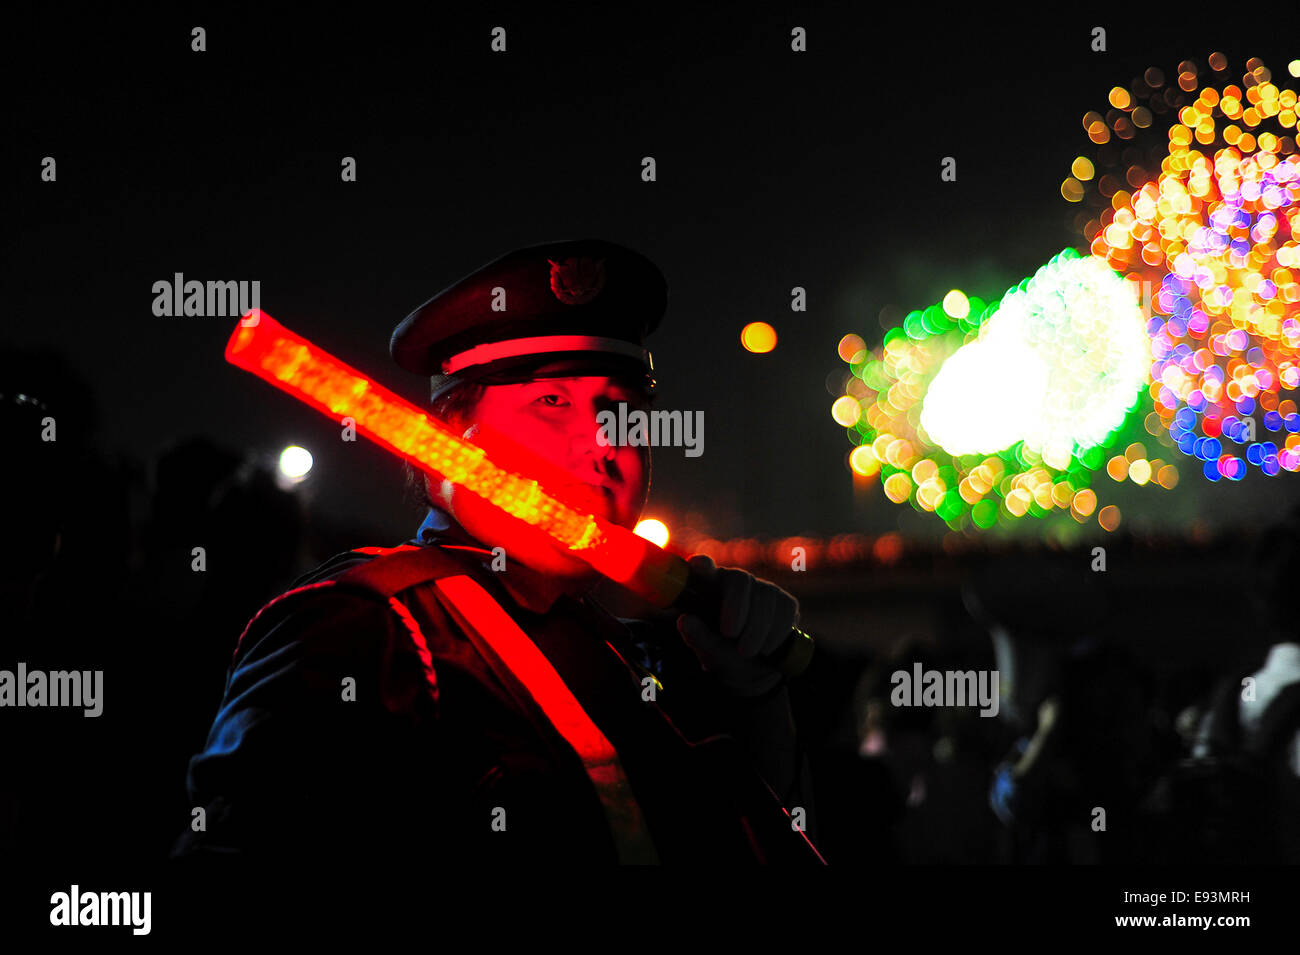 A security officer waves an illuminated baton to direct spectators at the Adachi Fireworks Festival. Stock Photo